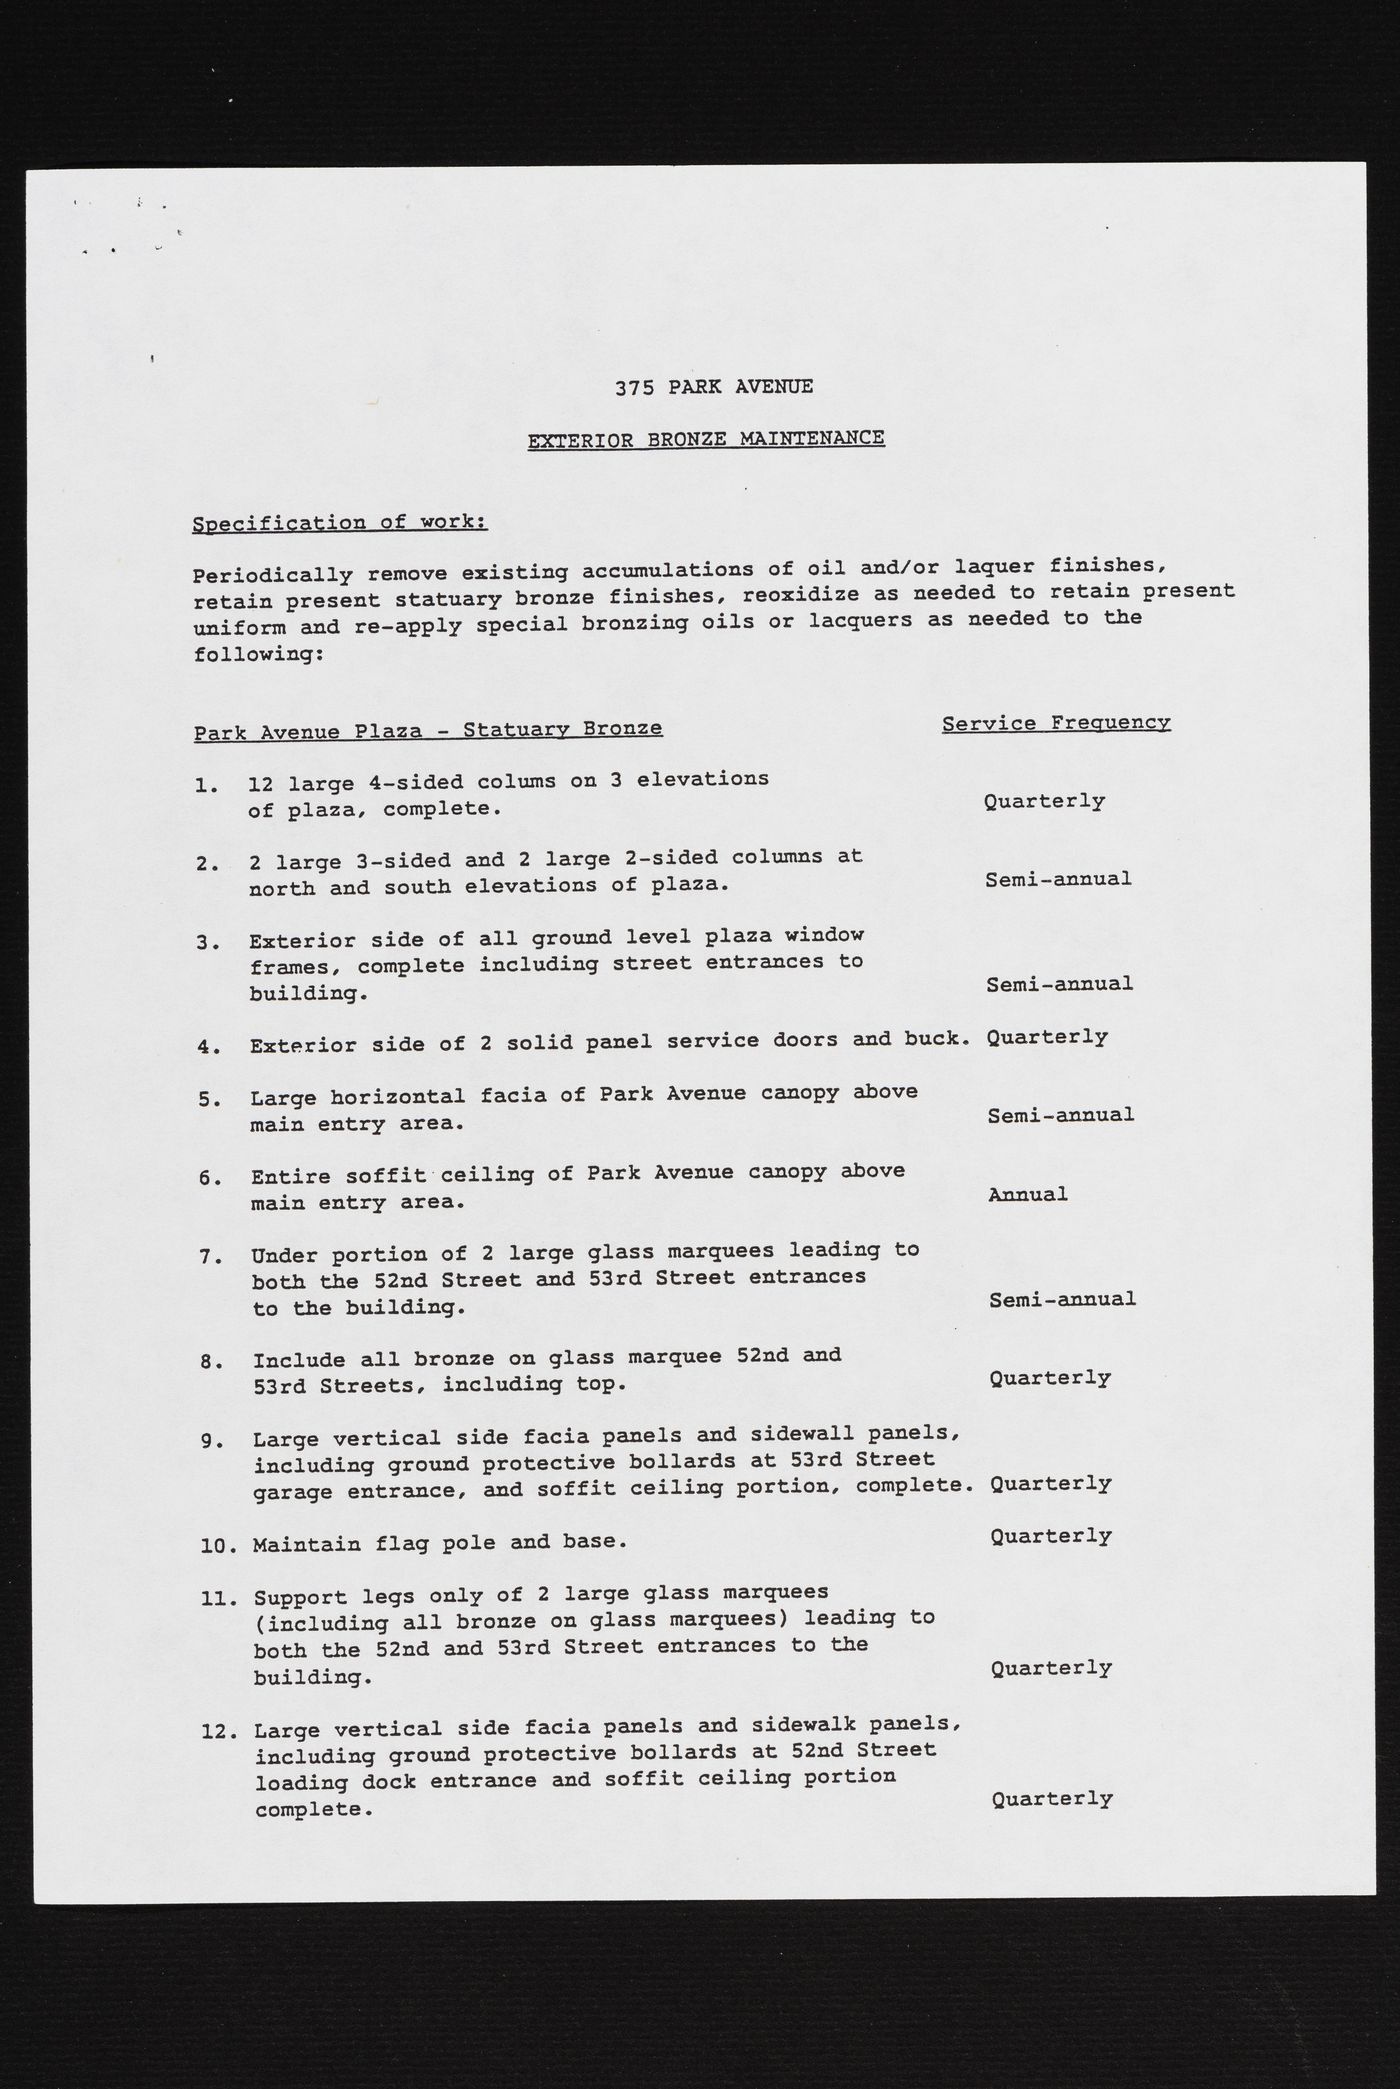 Correspondence and specifications related to bronze maintenance contract for Seagram Building, 375 Park Avenue, New York, New York